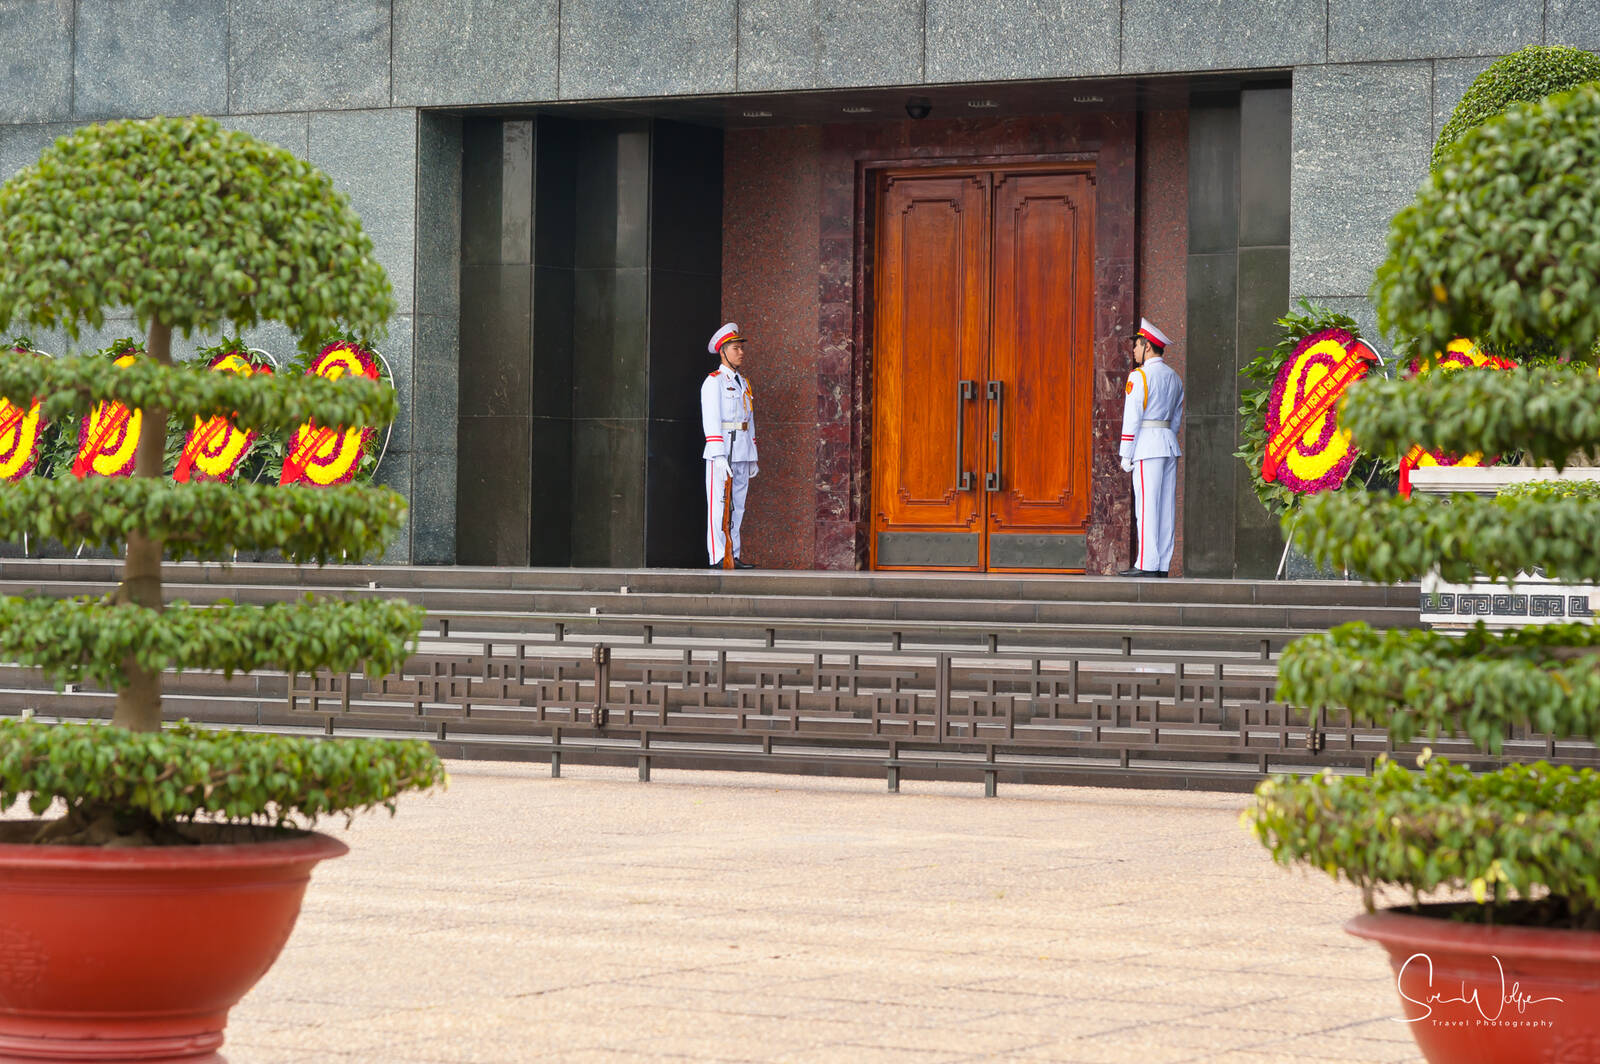 Image of Ho Chi Minh Mausoleum by Sue Wolfe